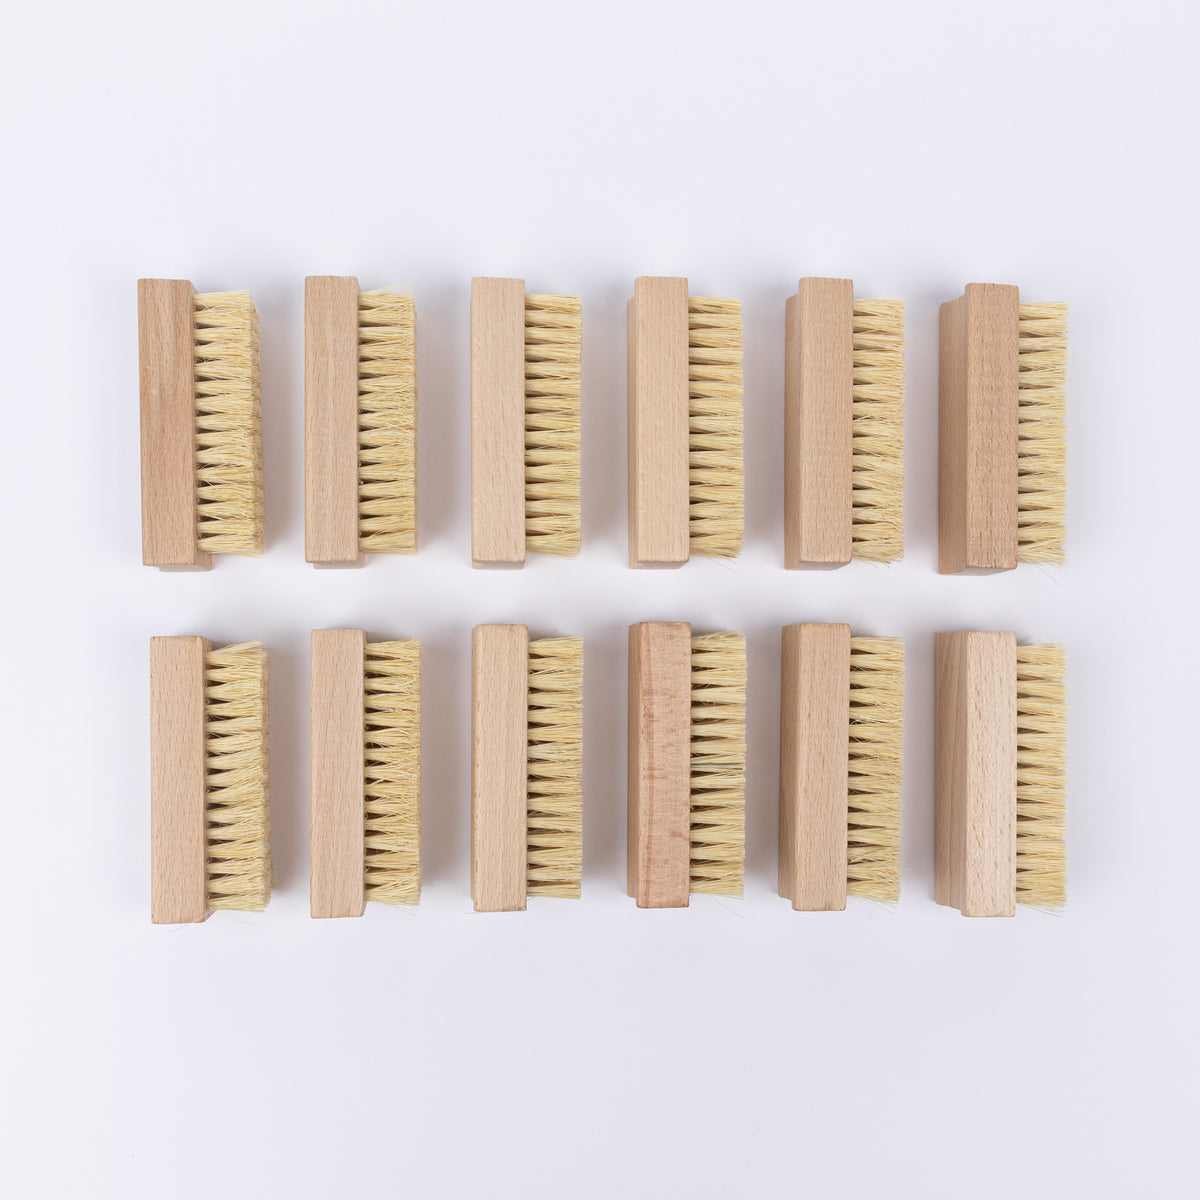 LAUNDRY - CLEANER Brushes (12 Pack)